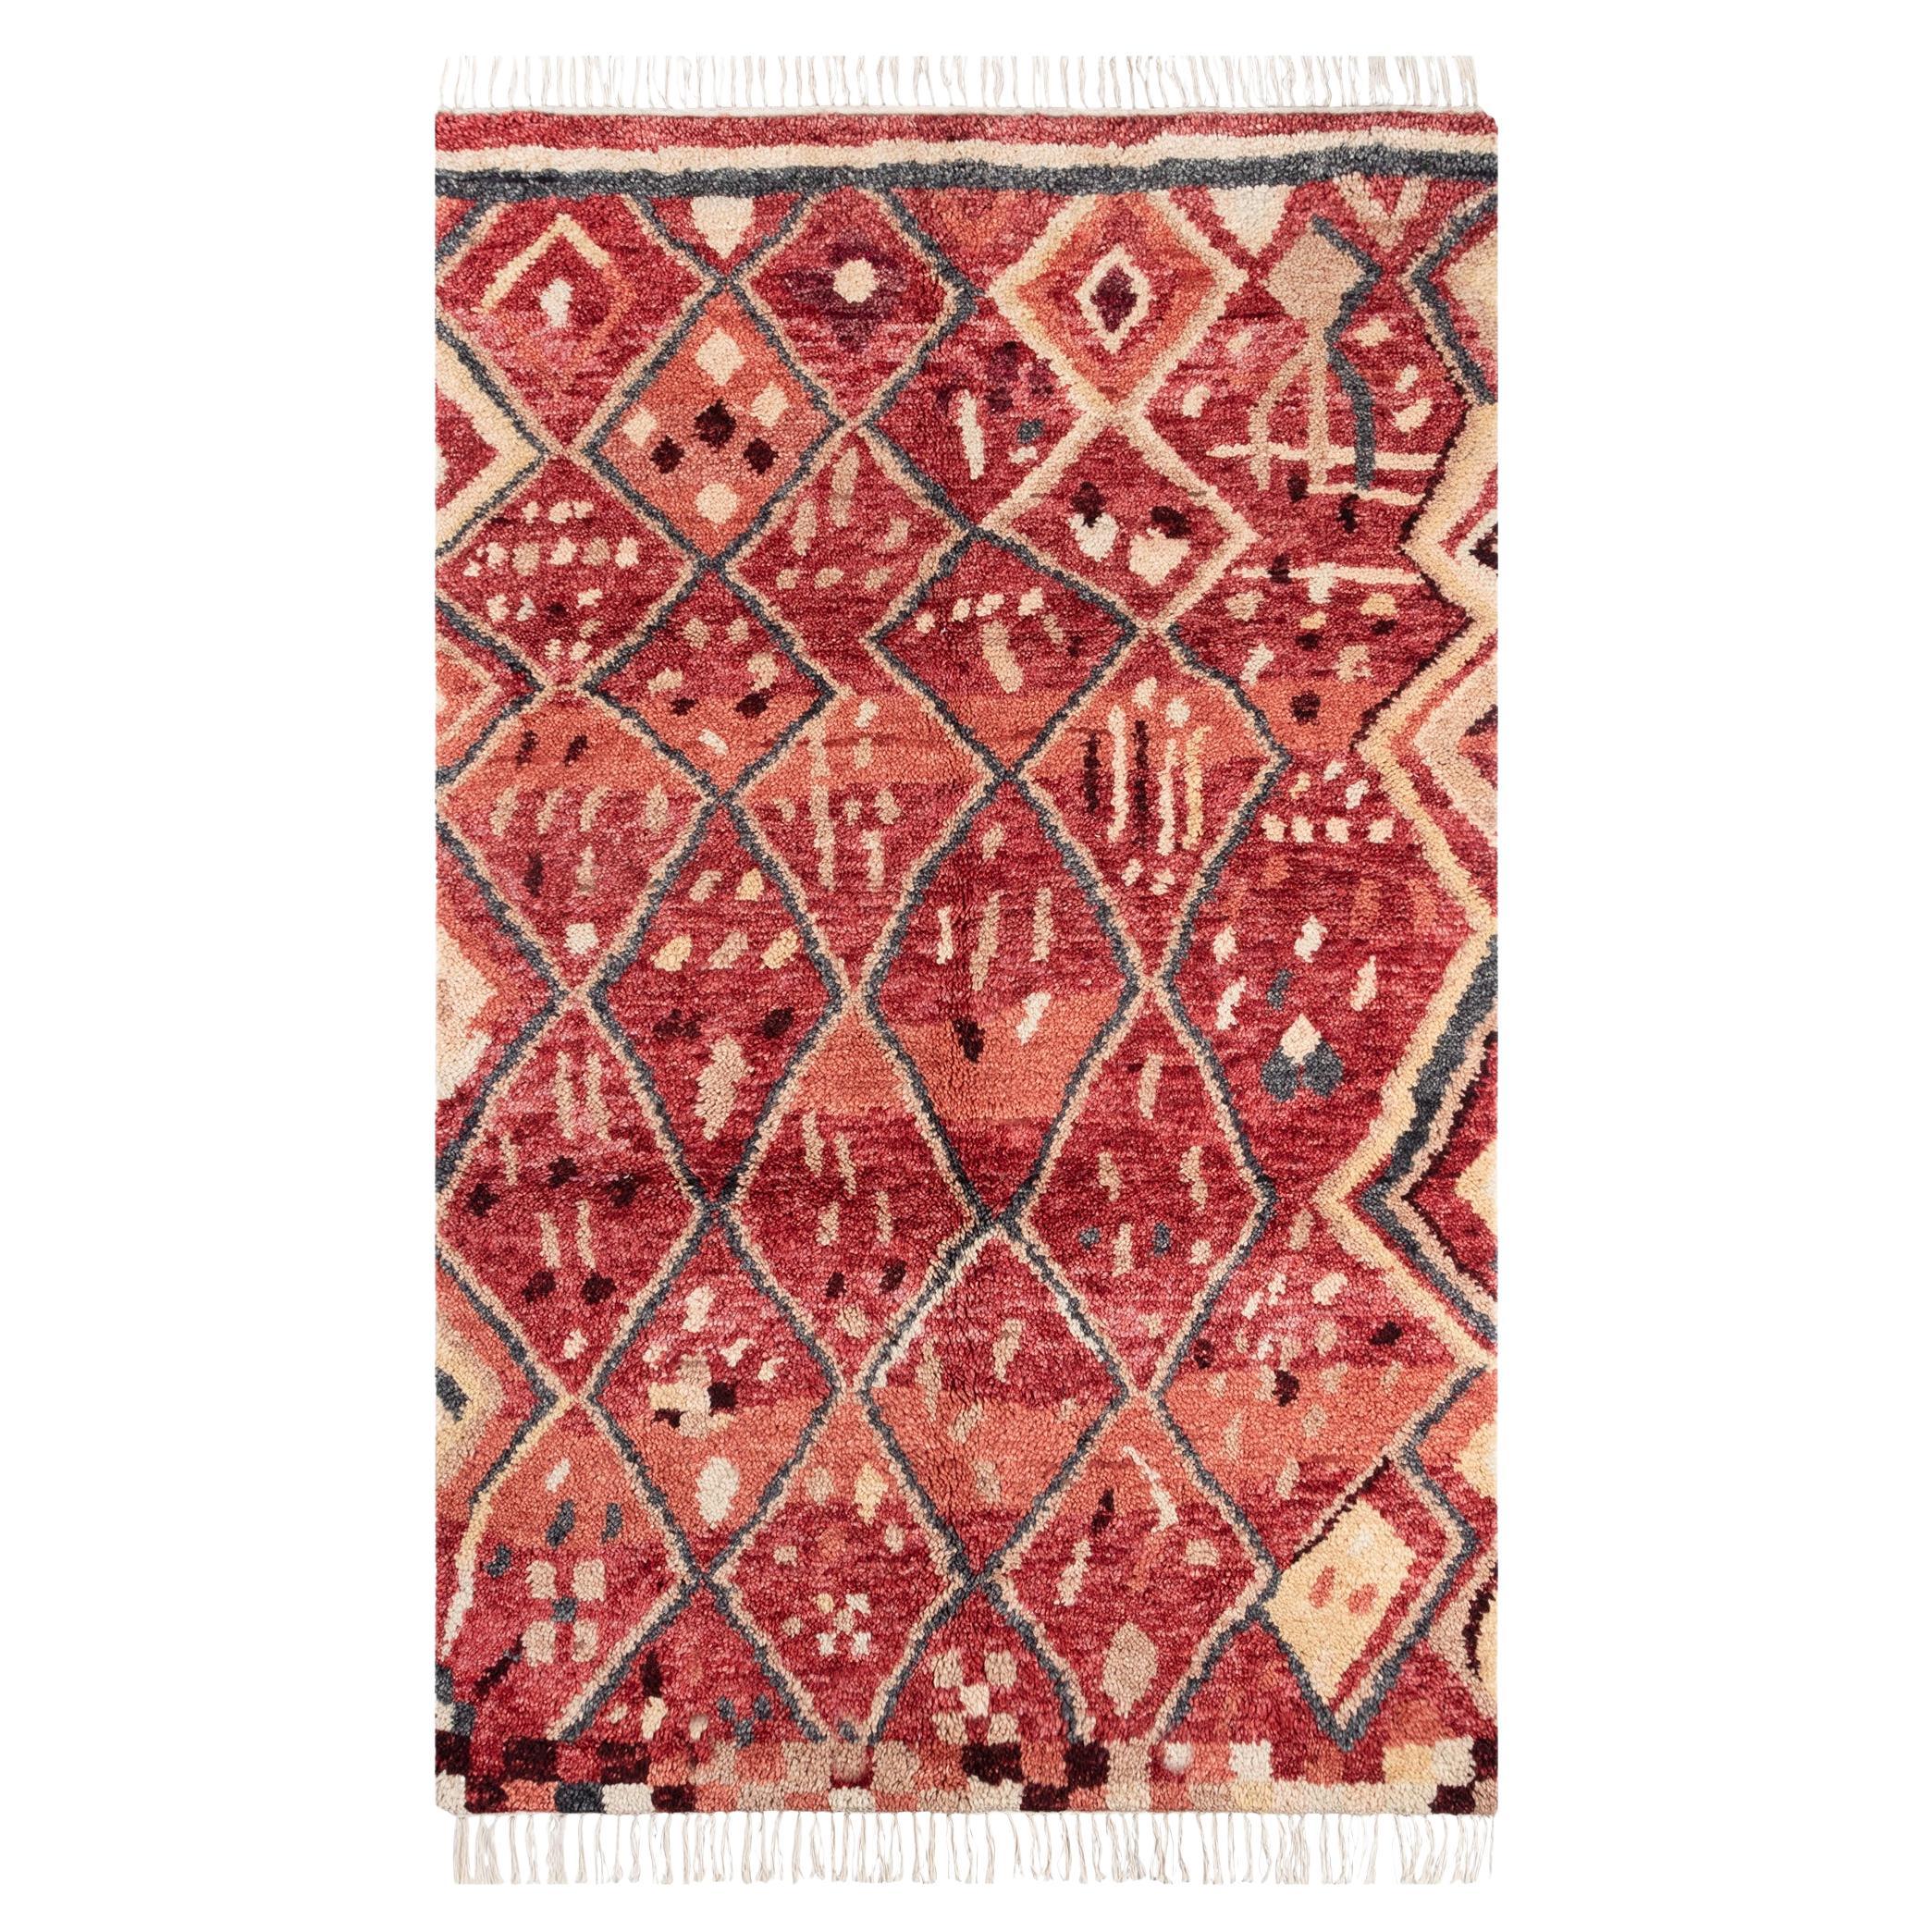 “Doukkala Gnibi” Moroccan-Inspired Rug by Christiane Lemieux For Sale